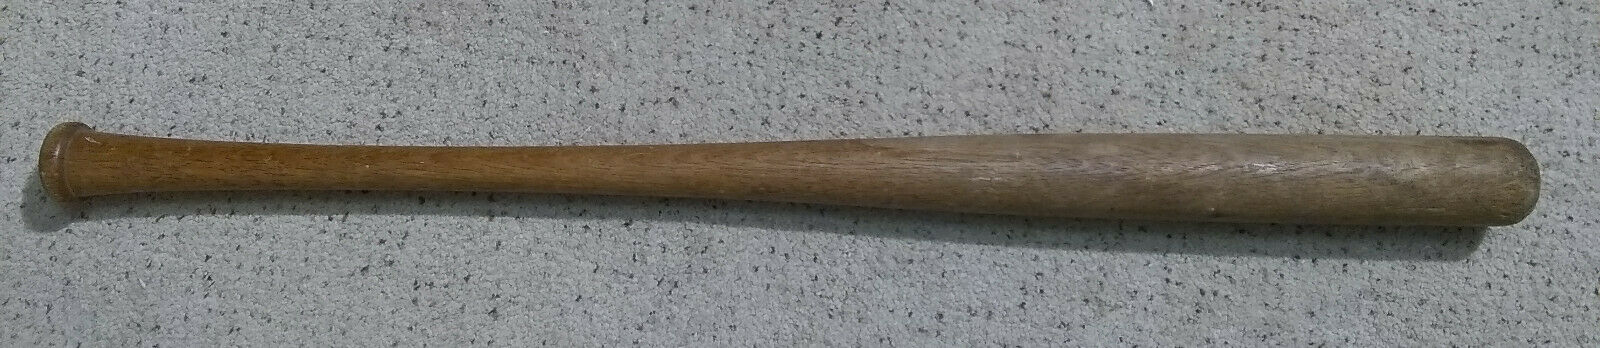 Vintage Wood Wooden Unbranded *baseball Bat* 34” Old Antique Sports Collectible